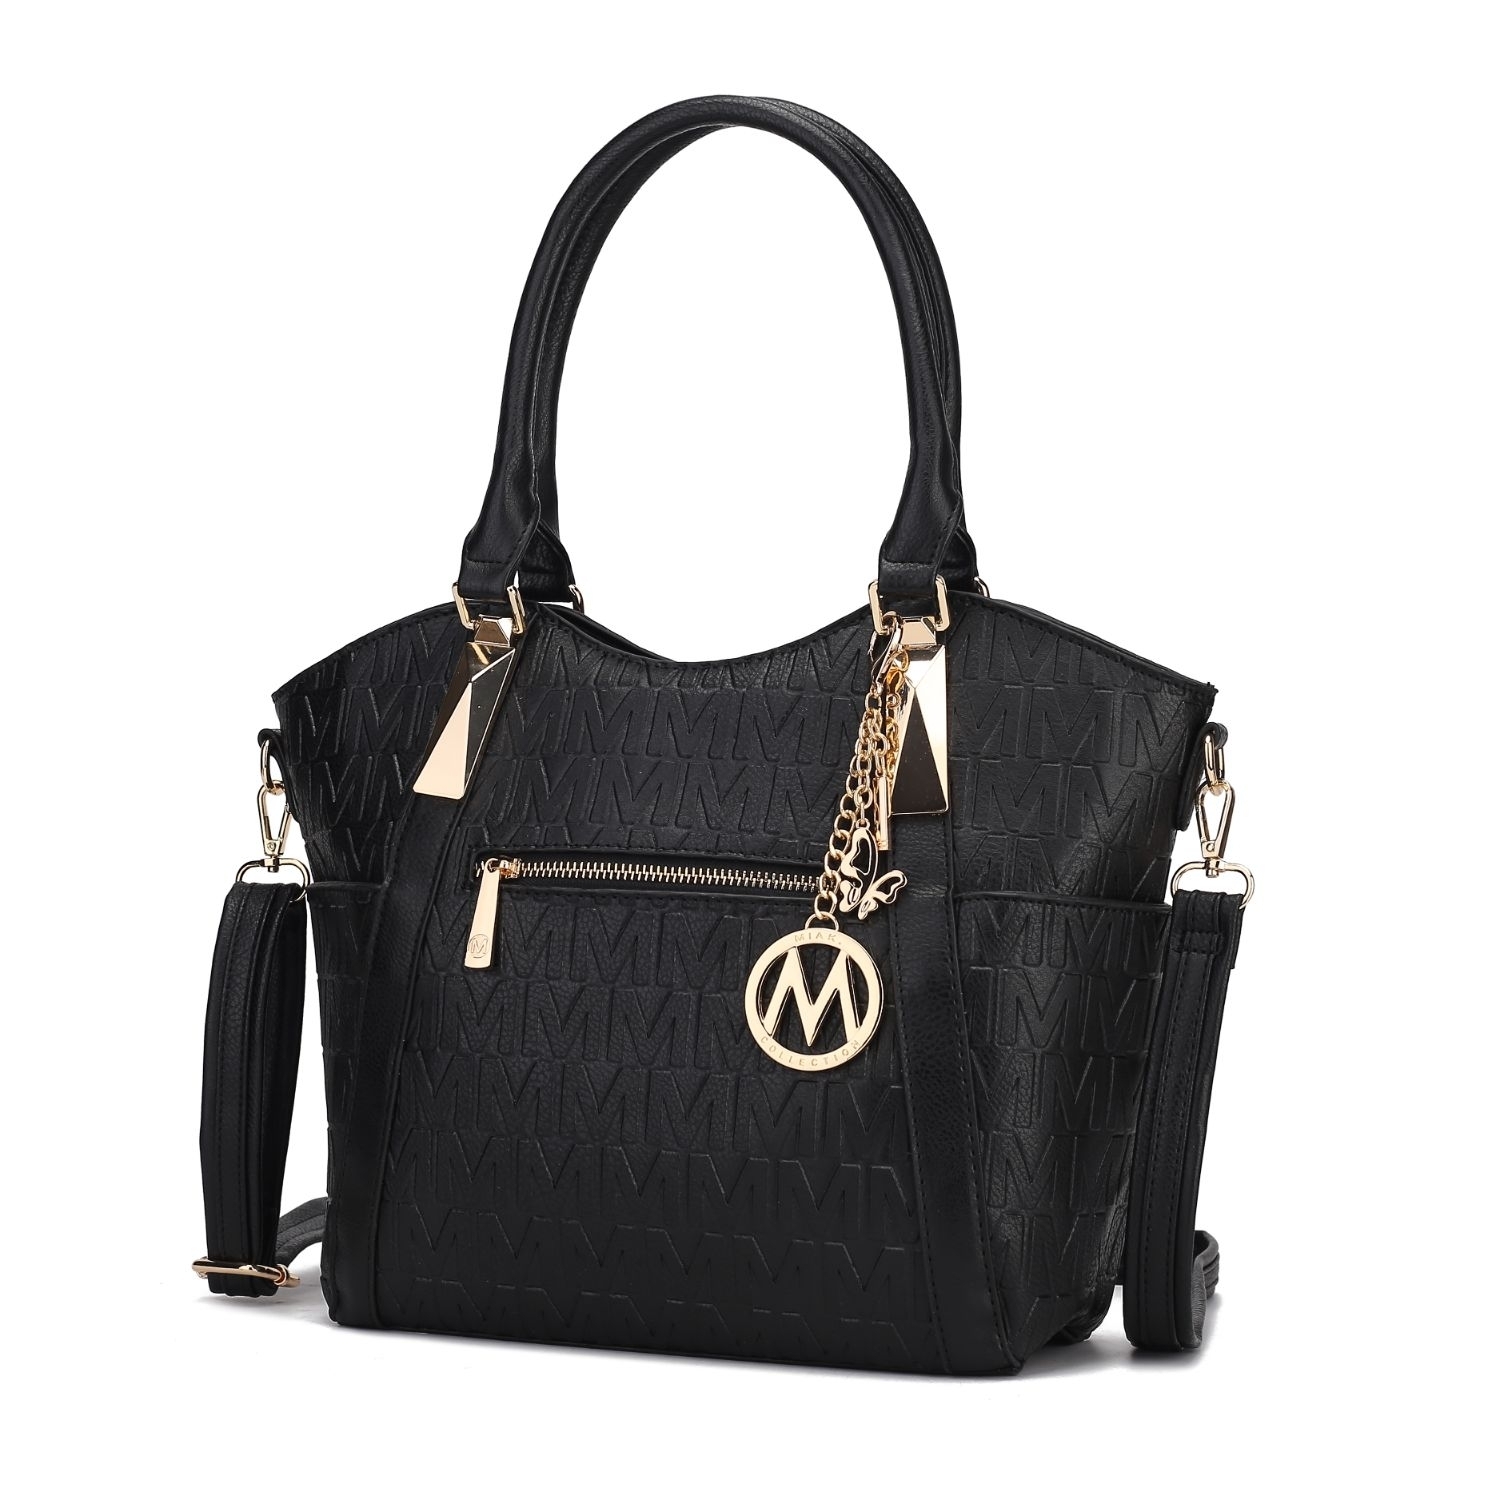 MKF Collection Lucy Tote Handbag By Mia K. - Beige